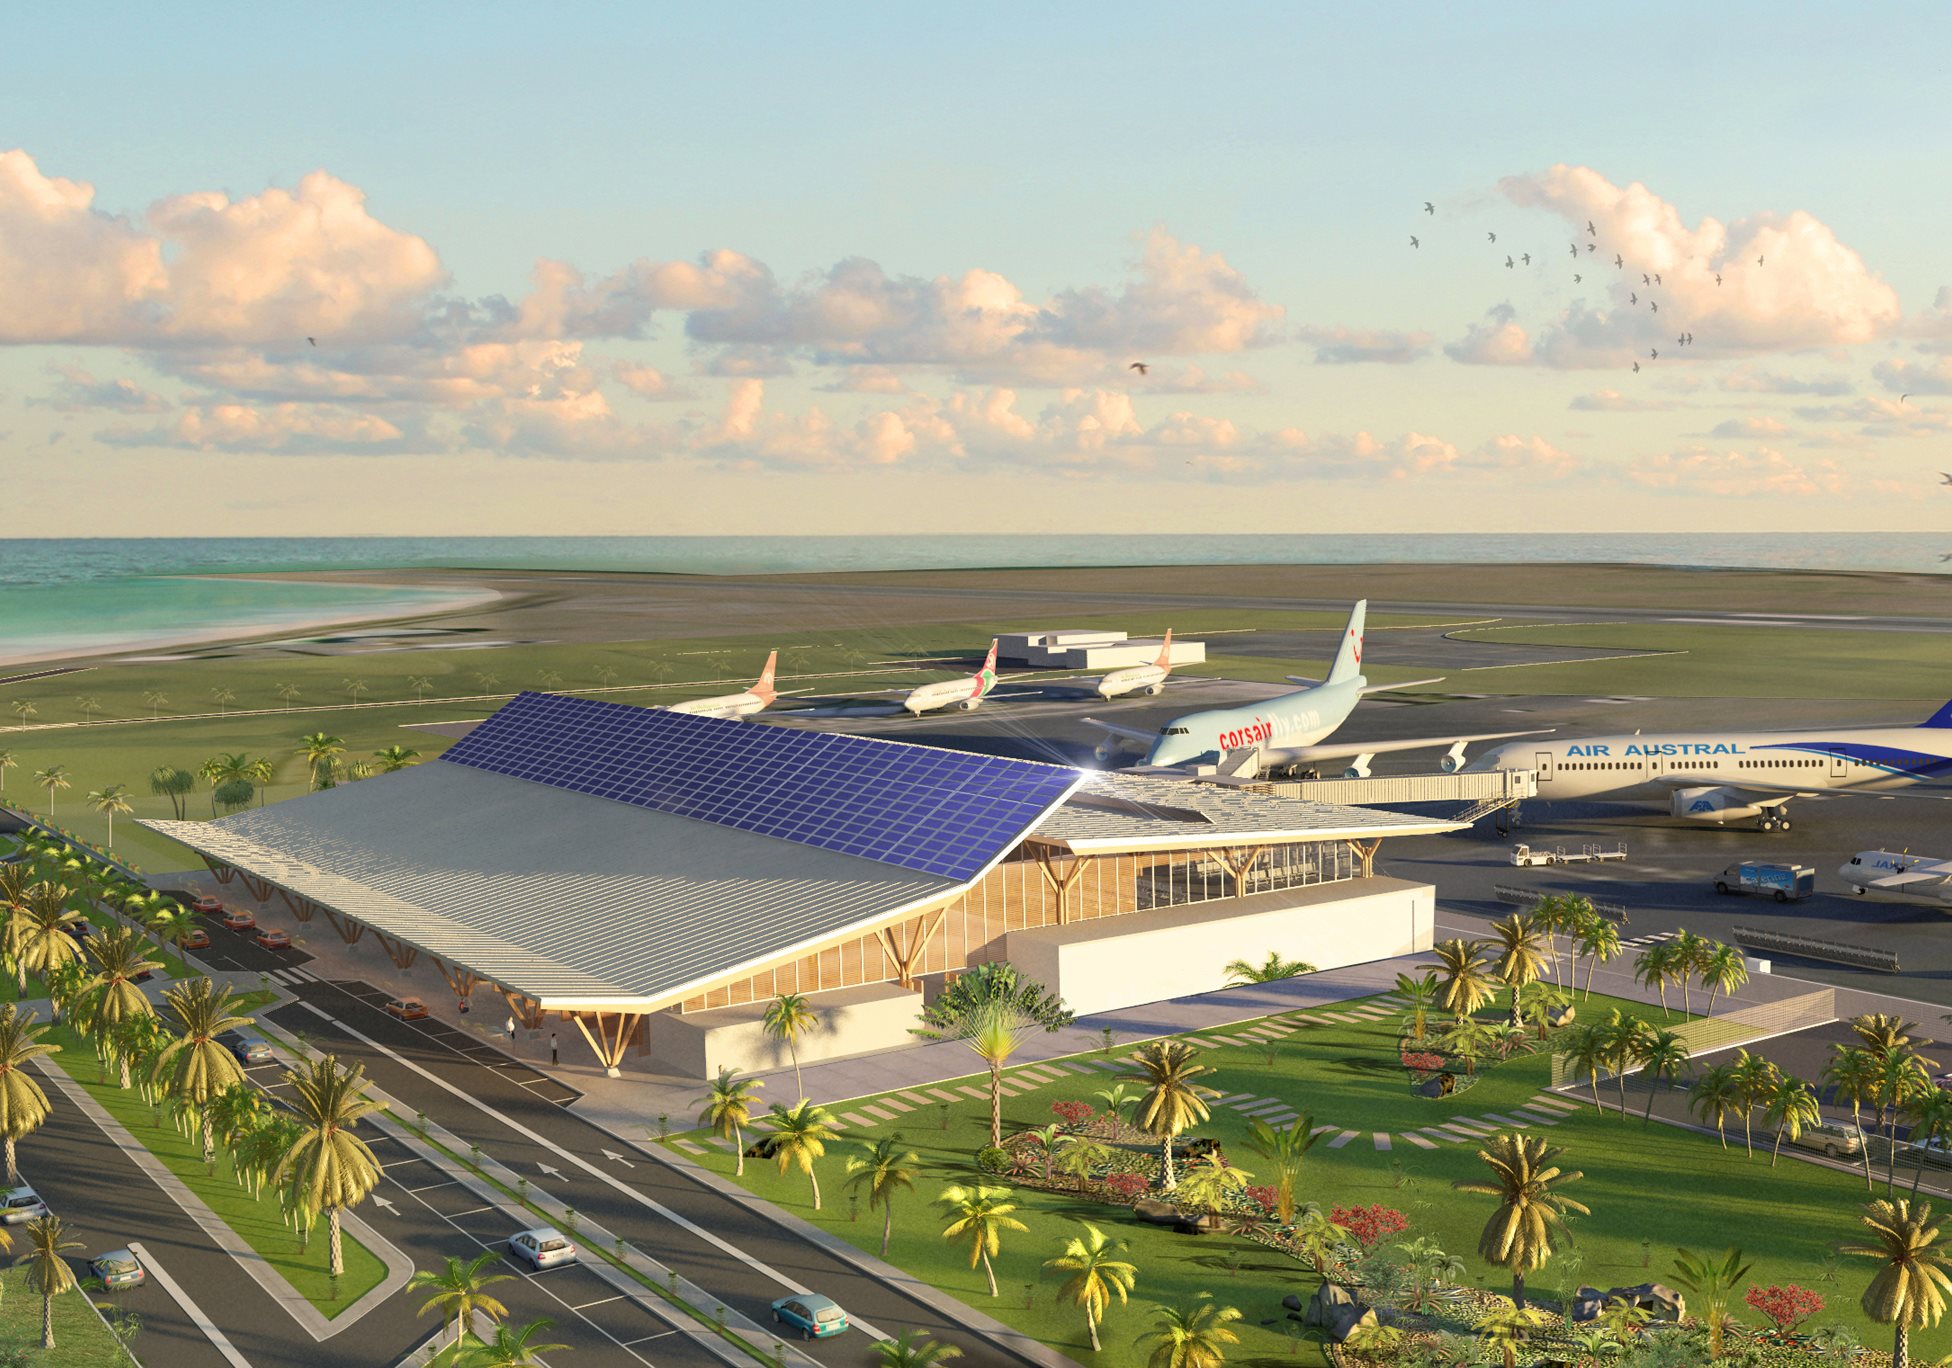 Visualisation showing an arial view of the new runway